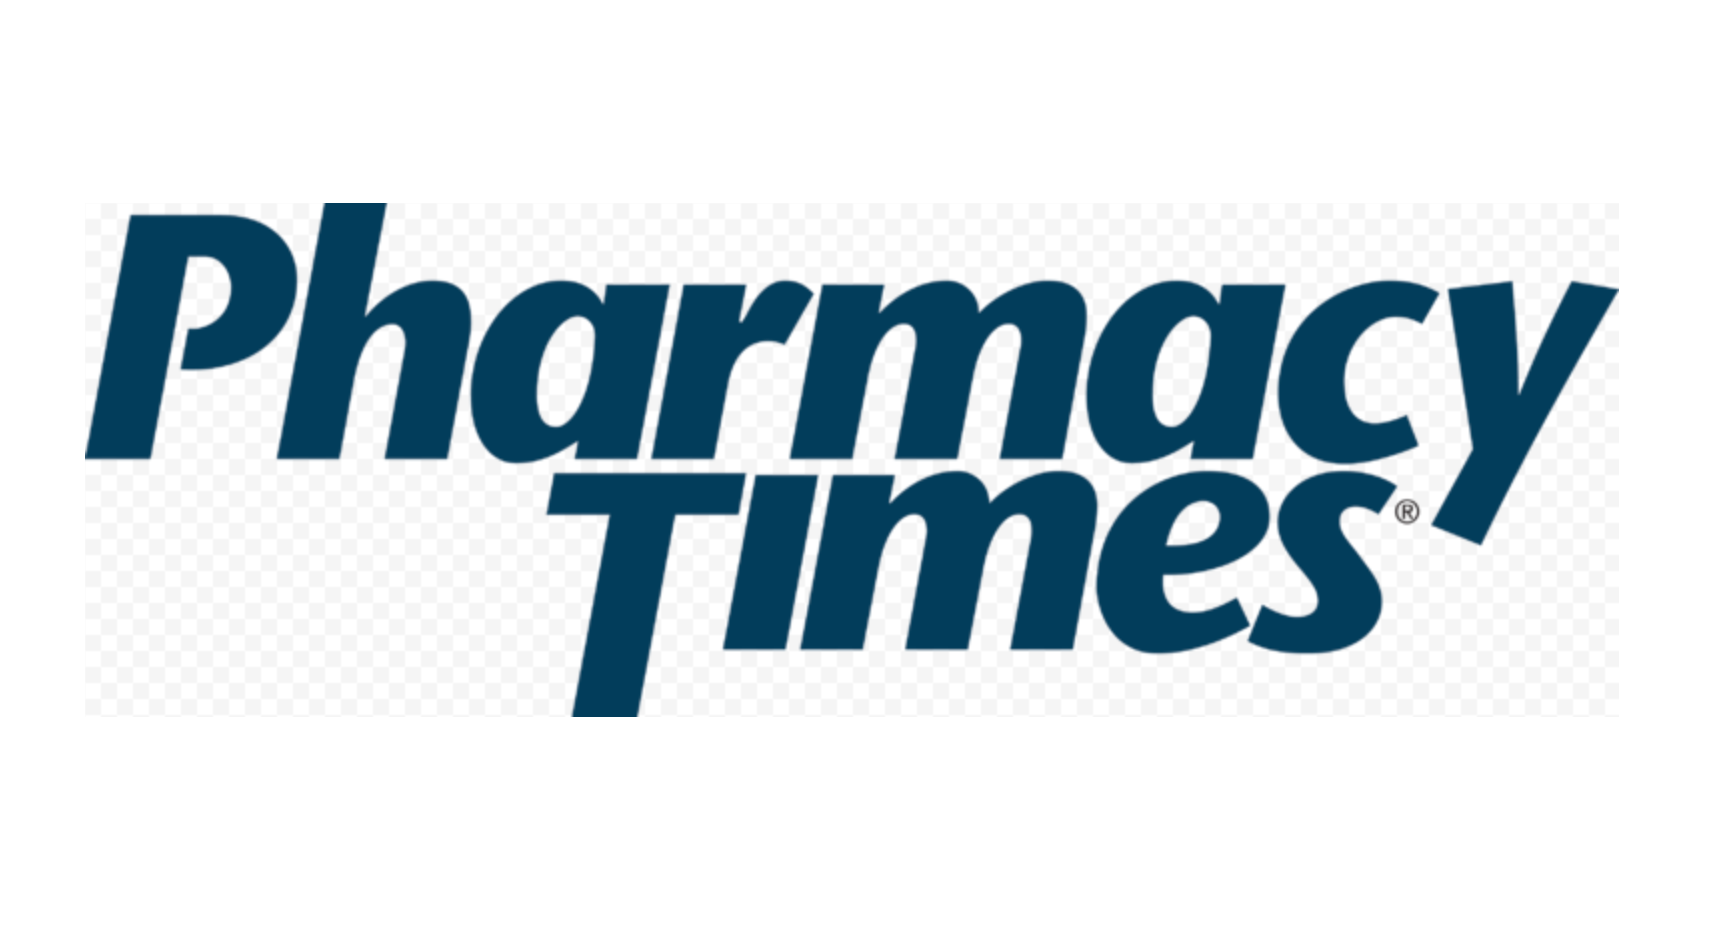 Pharmacy Times ® Adds Five Notable New Partners to its Strategic Alliance Partnership Program